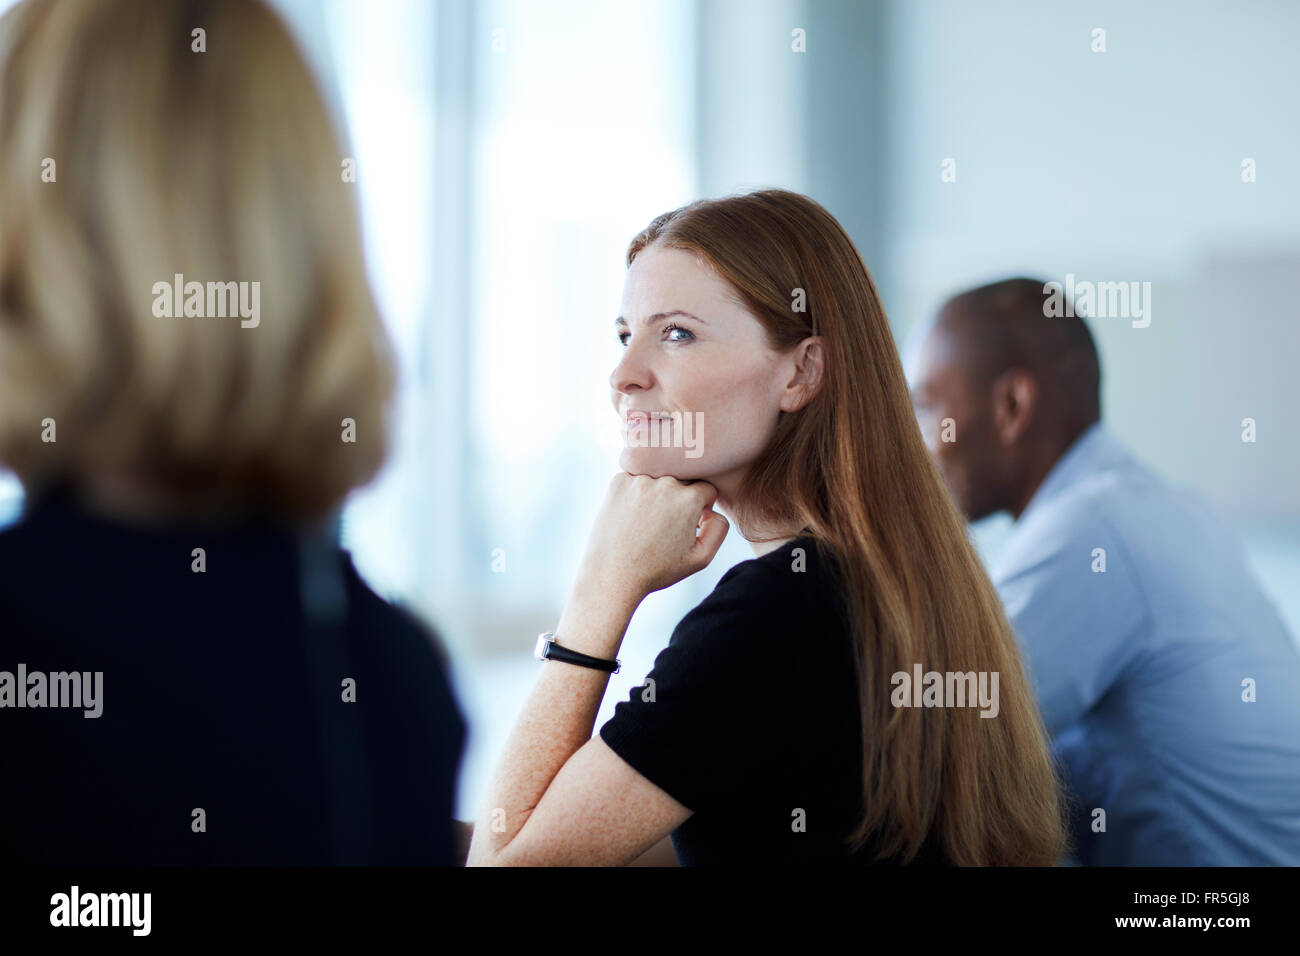 Confident businesswoman listening in meeting Banque D'Images